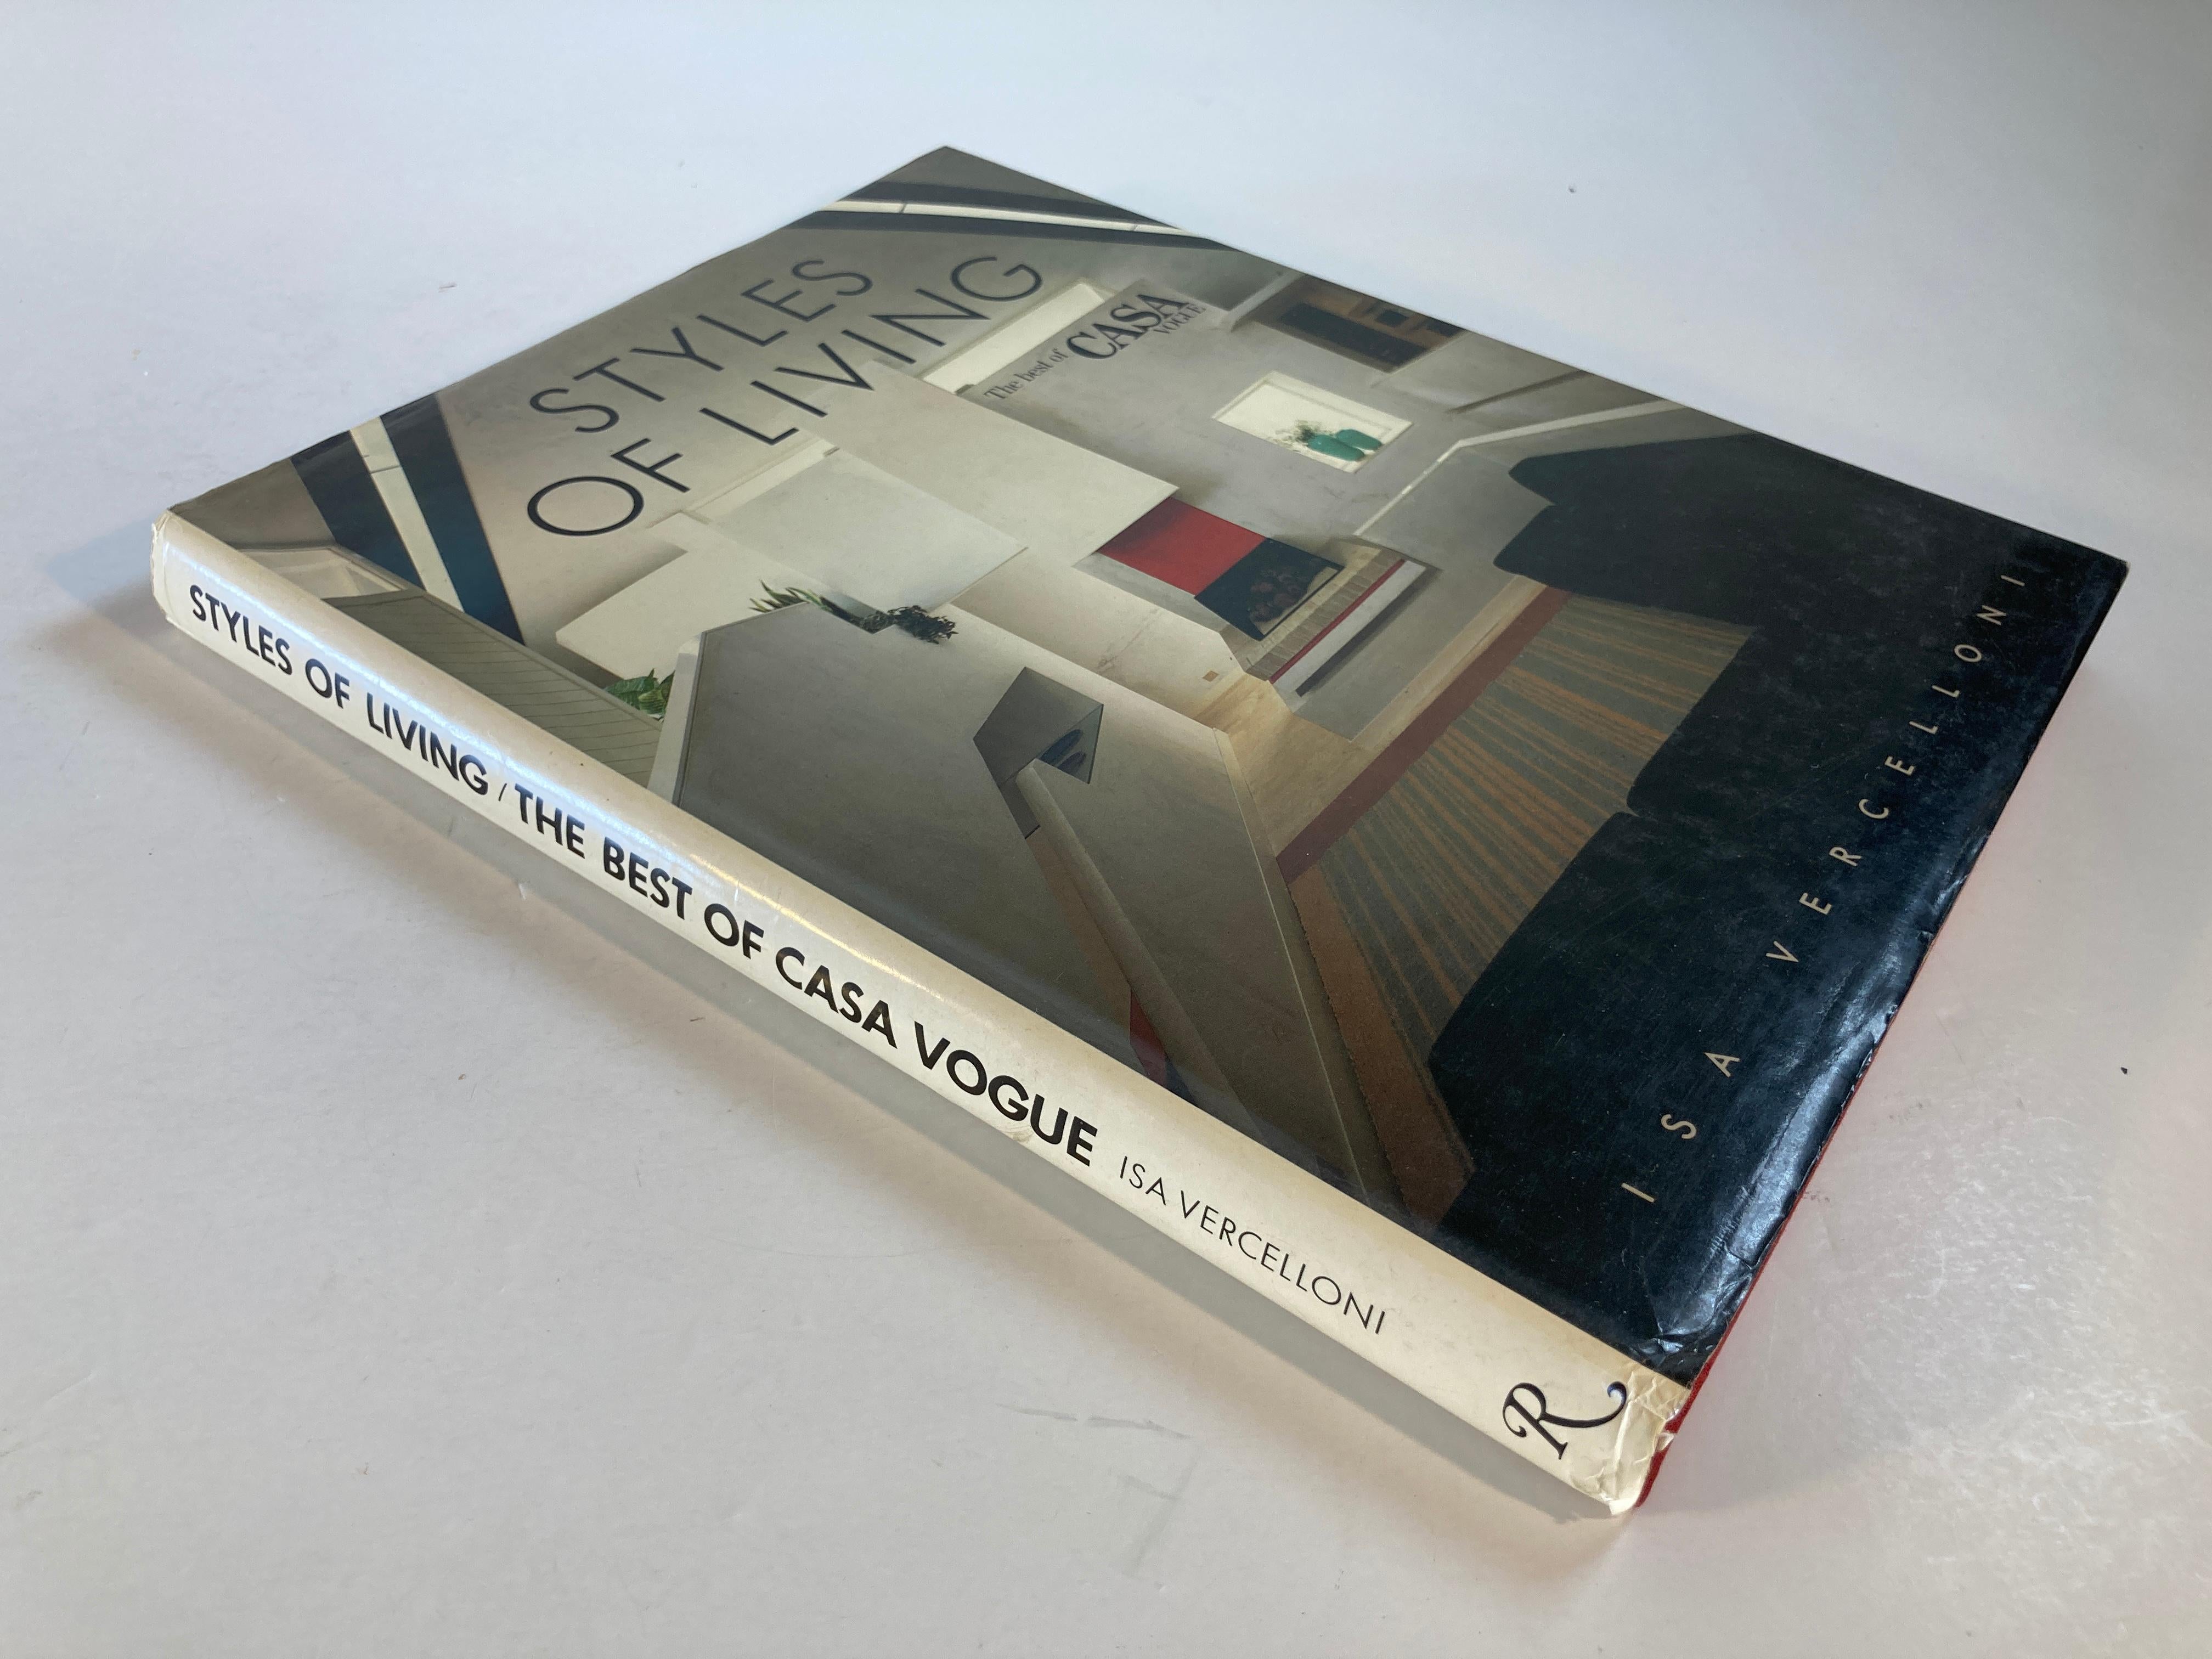 Styles of Living: The Best of Casa Vogue coffee table hardcover book.
by Isa Vercelloni
New York: Rizzoli, 1985.
This is a compendium of fabulous houses, unashamedly showcasing the lifestyles of the very rich and very famous.
Includes homes lived in